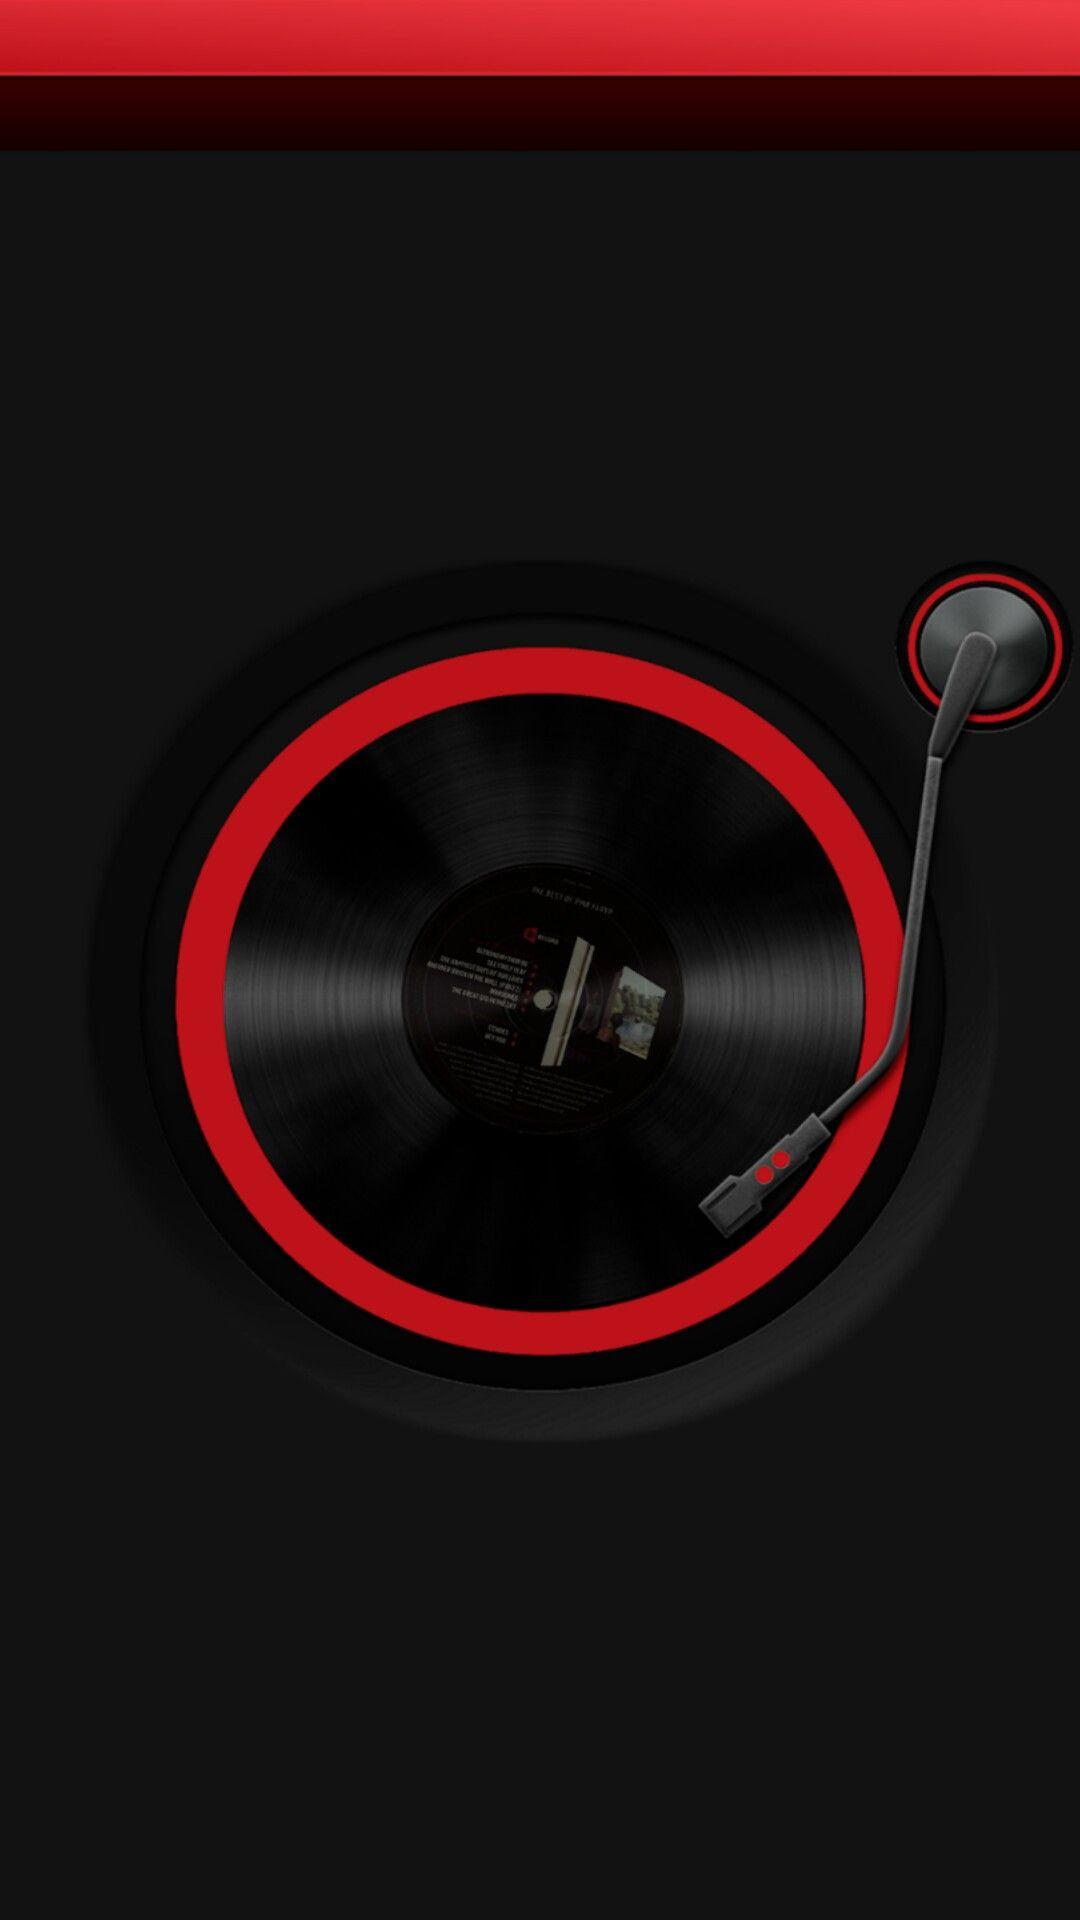 Red and Black Record Wallpaper. *Music Wallpaper